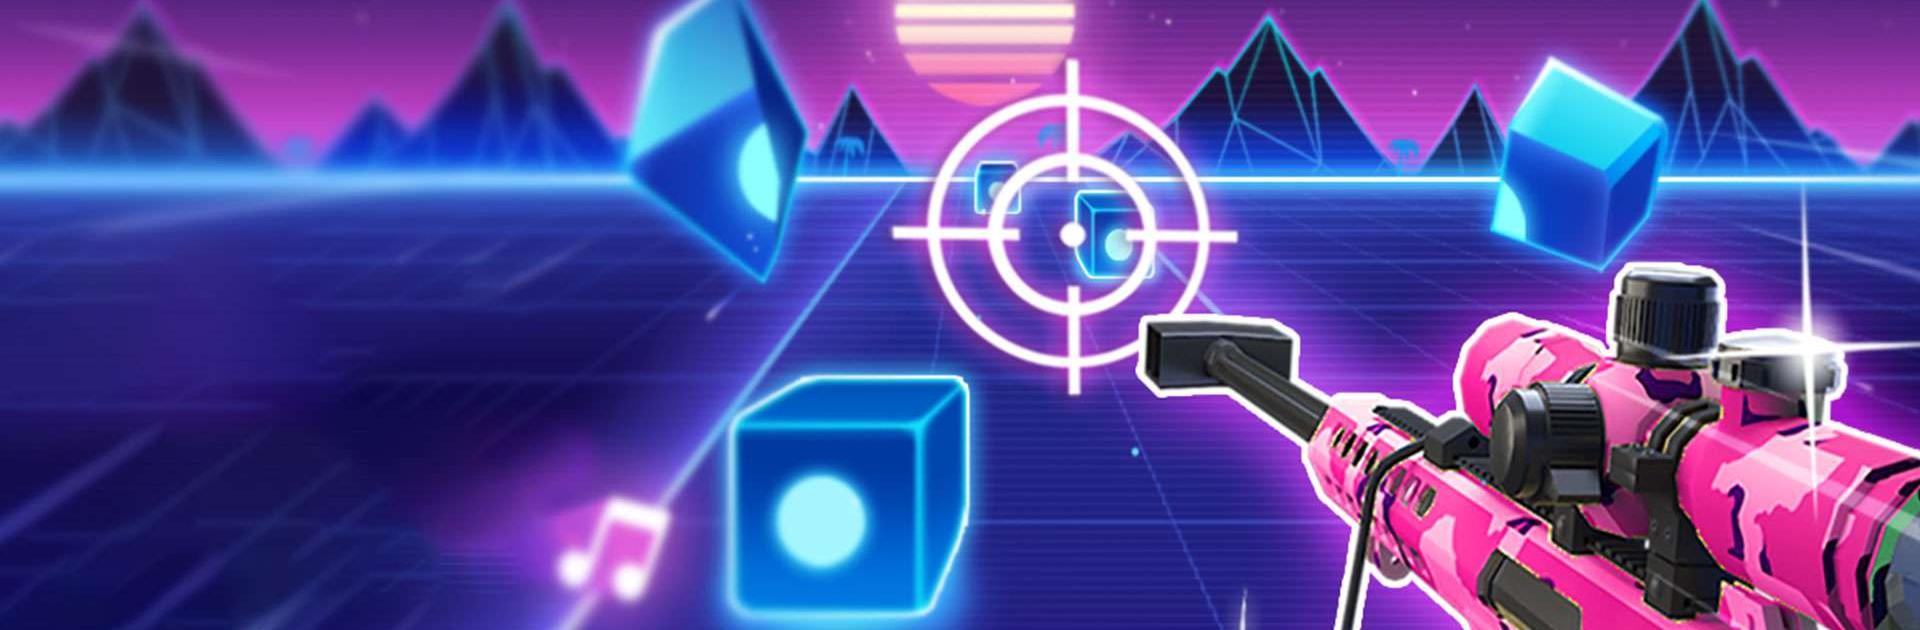 Beat Shoot 3D:EDM Music Game - Apps on Google Play